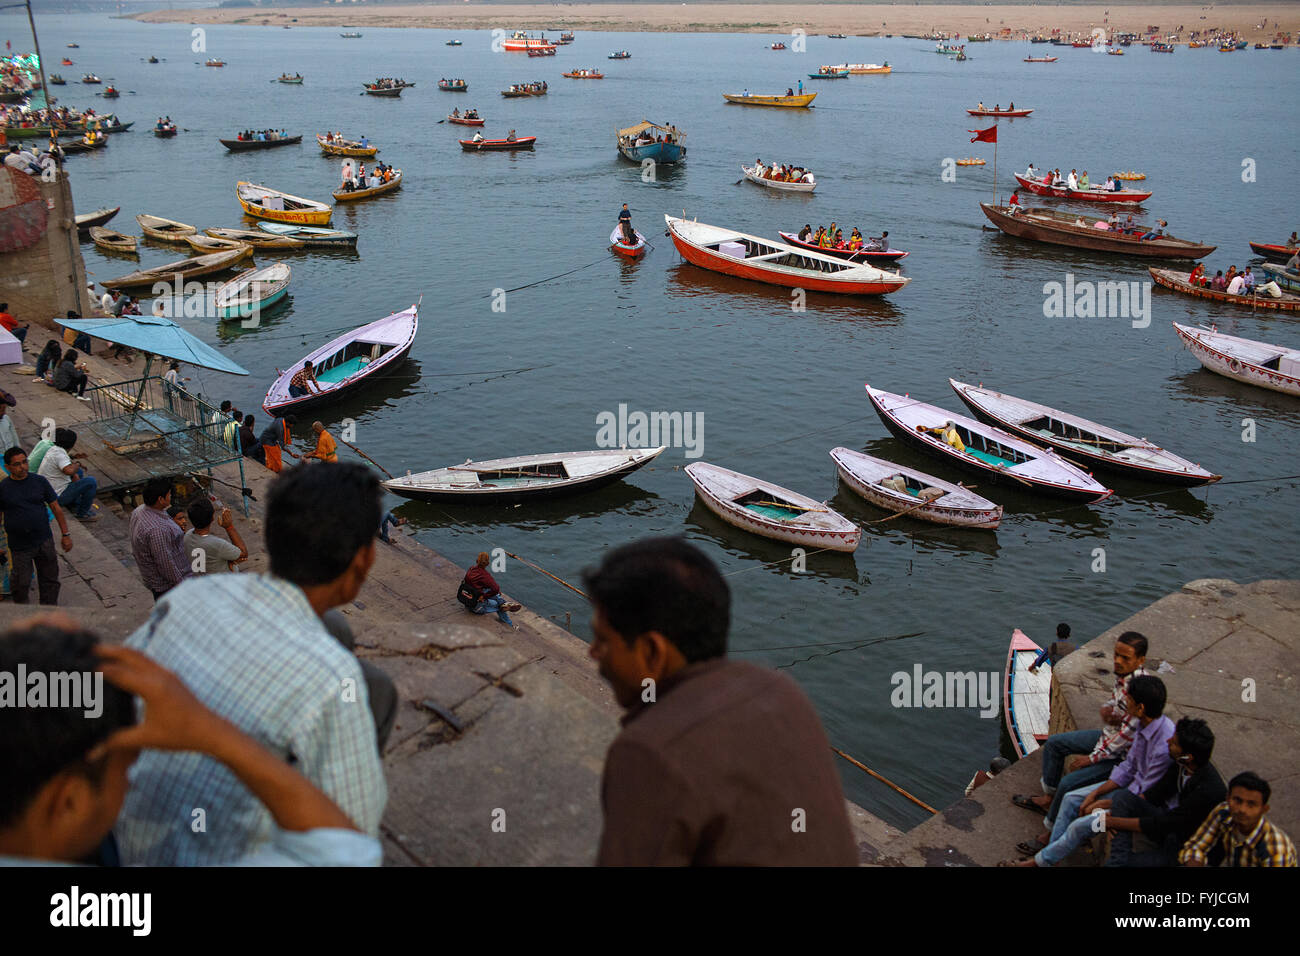 A view onto the Ganges river with boats from one of the ghats in Varanasi, India. Stock Photo